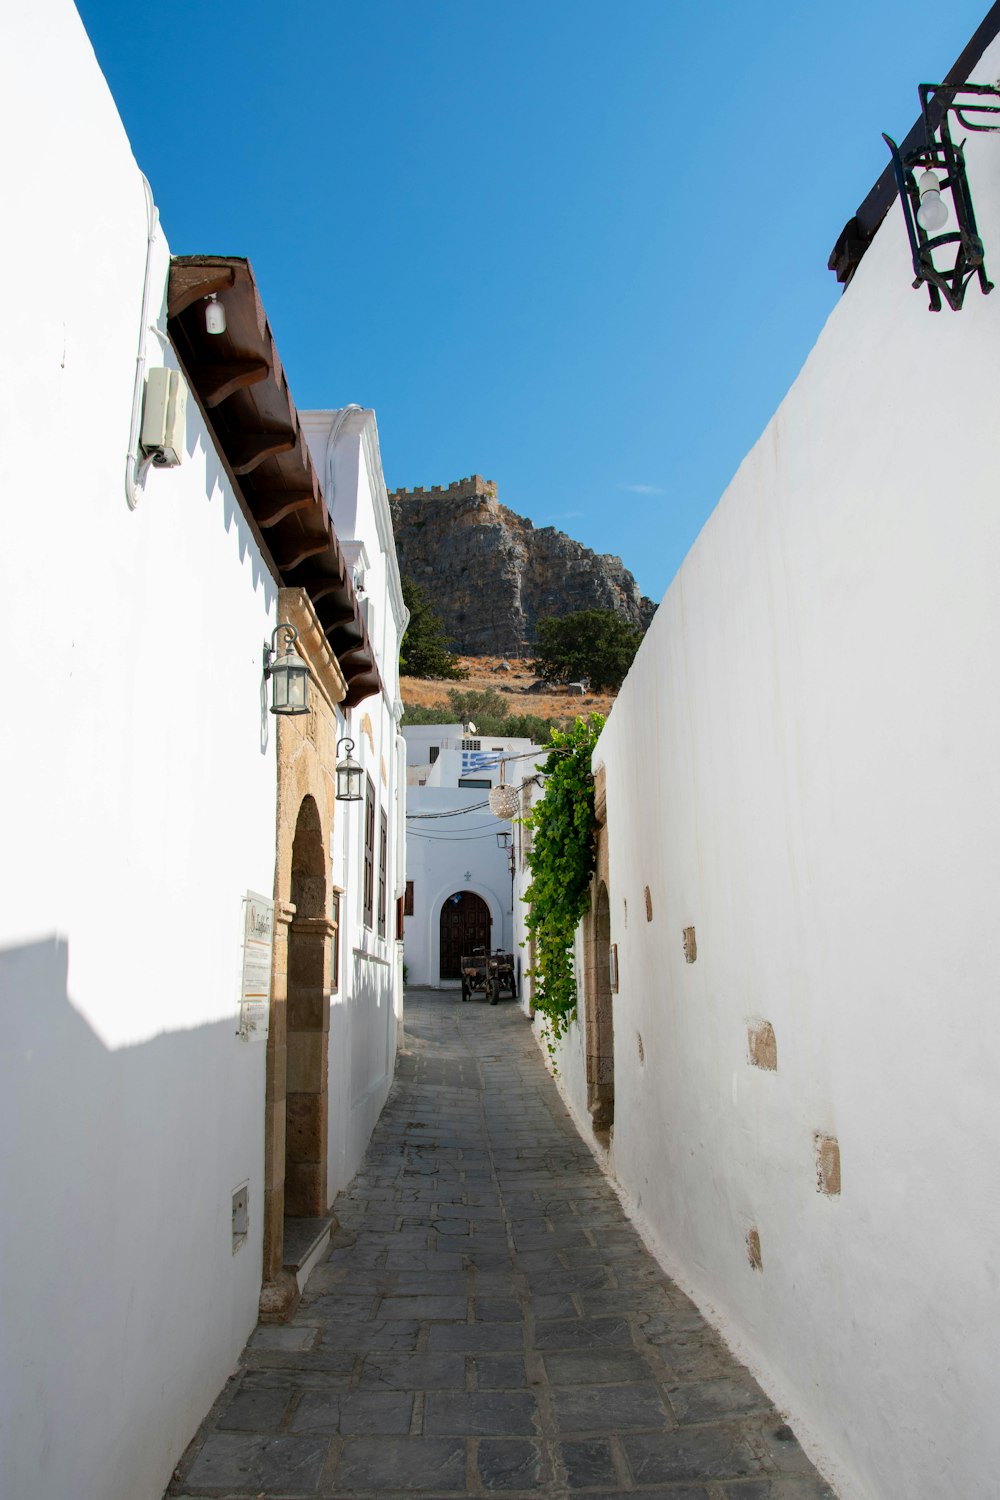 a narrow alley way with a mountain in the background